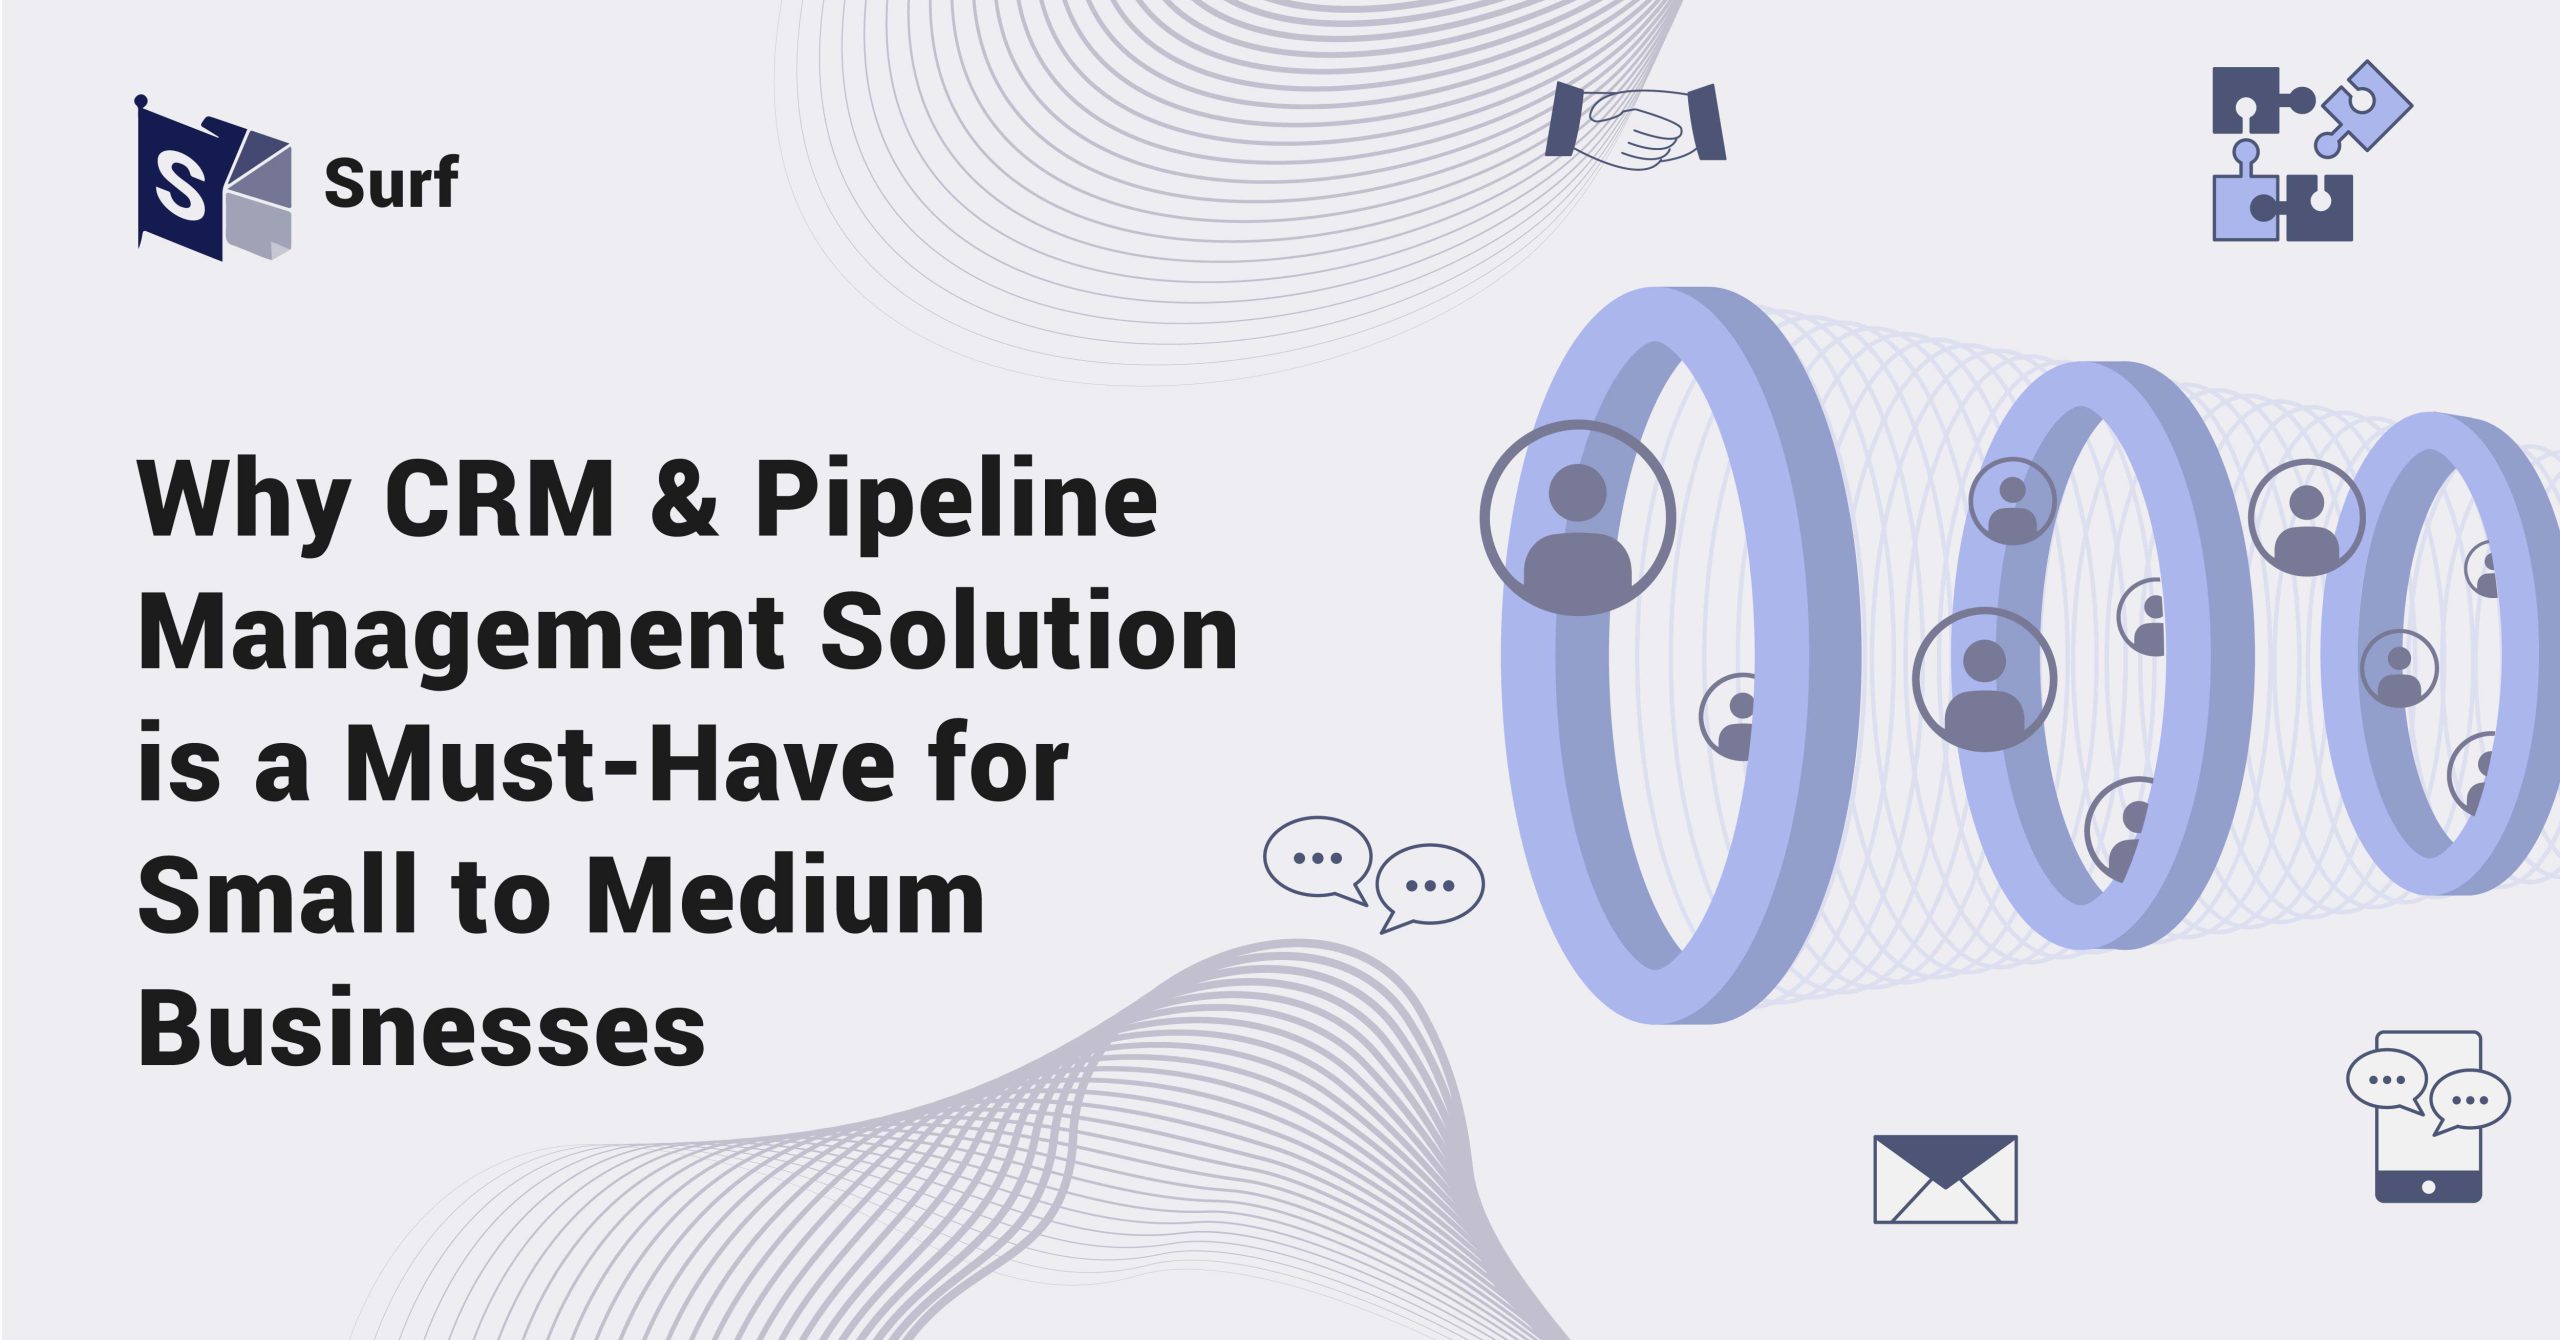 Why CRM & Pipeline Management Solution is a Must-Have for Small to Medium Businesses